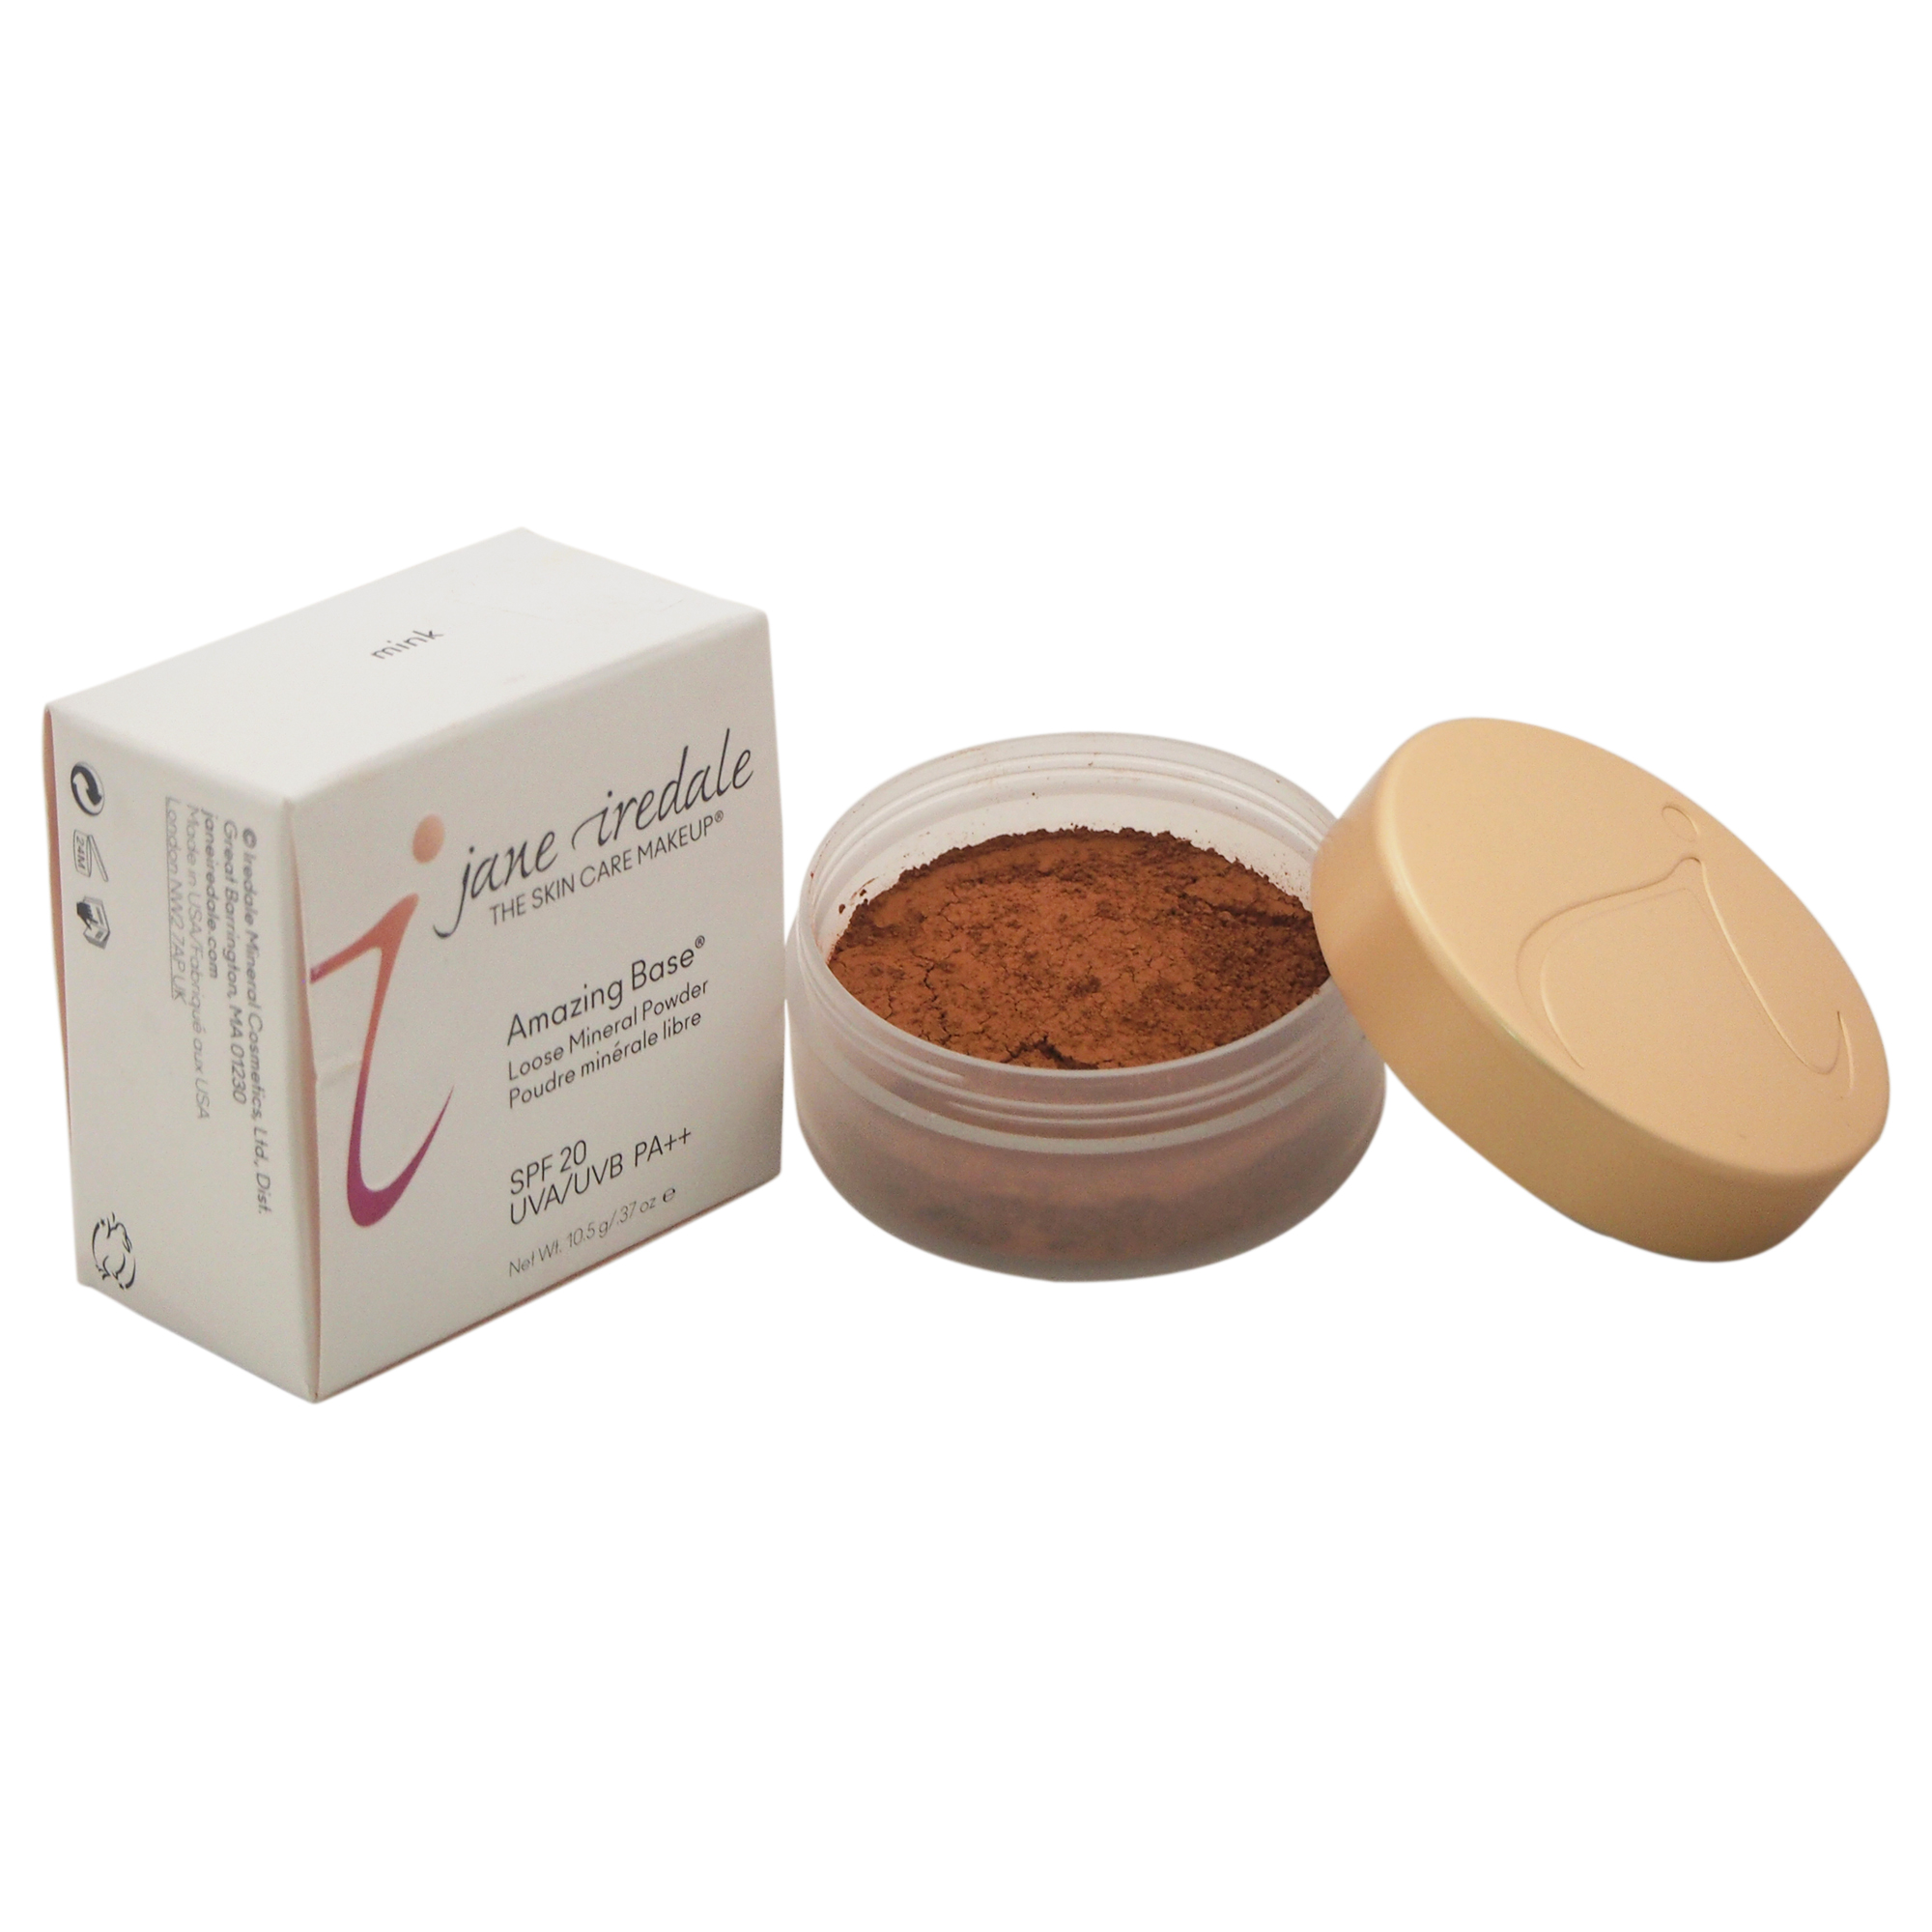 Amazing Base Loose Mineral Powder SPF 20 - Mink by Jane Iredale for Women - 0.37 oz Powder